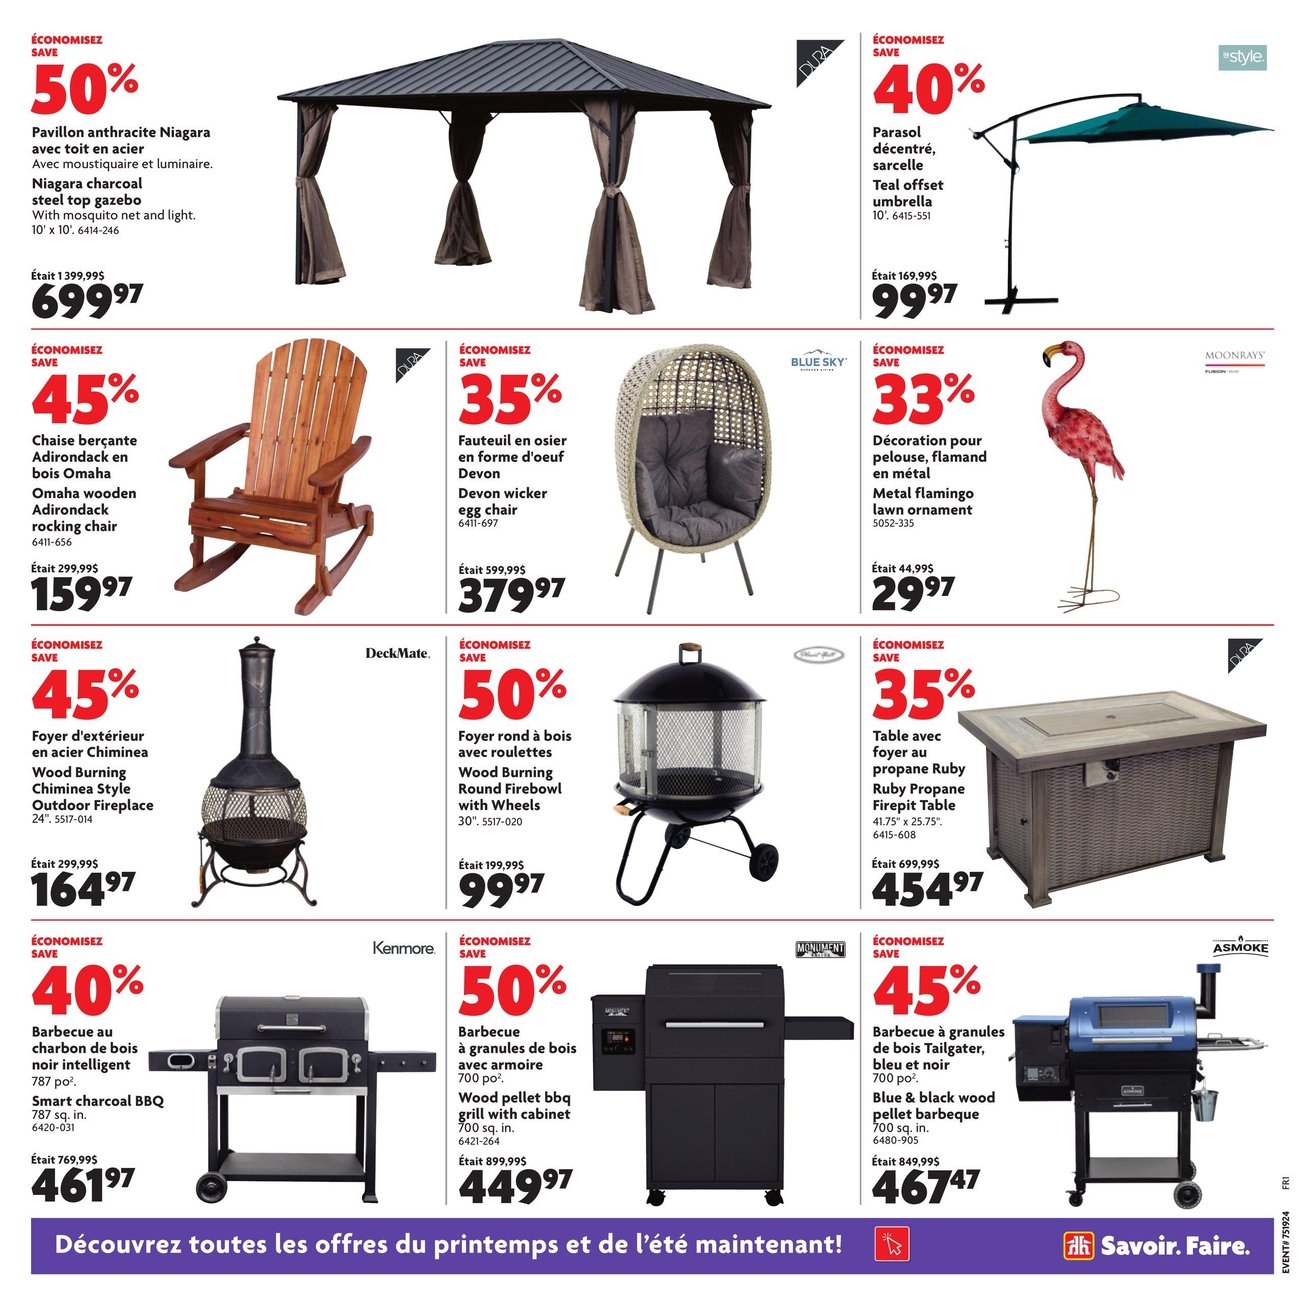 Home Hardware Building Centre - Quebec - 2 Weeks of Savings - Page 17